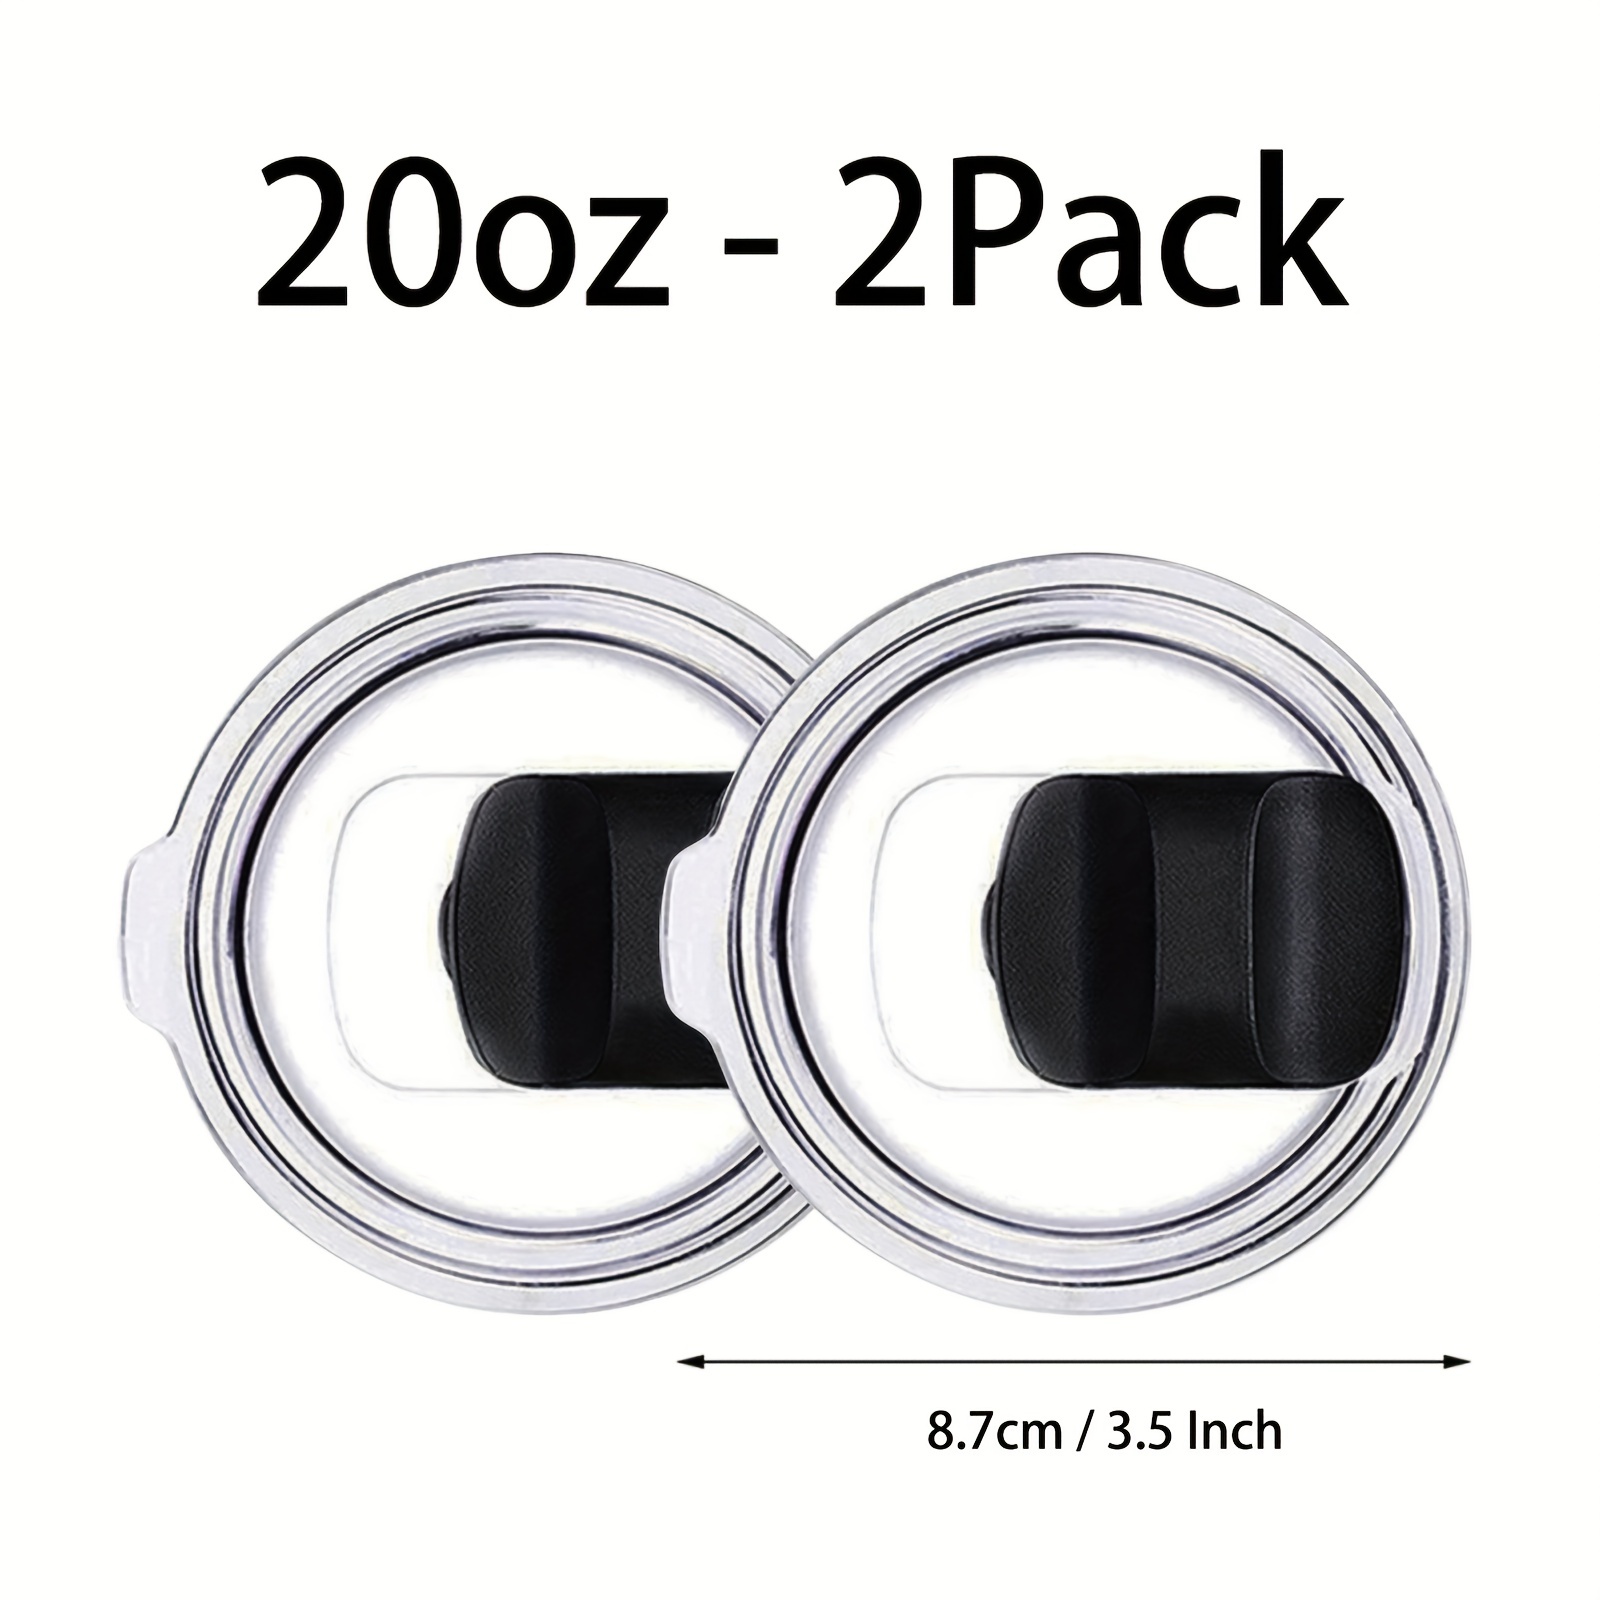 2 Pack 20oz Magnetic Tumbler Lid with 2 Pcs Replacement Magnetic Slider for Yeti Rambler Ozark Trail Old Style RTIC Coffee Tumbler Mugs, BPA Free